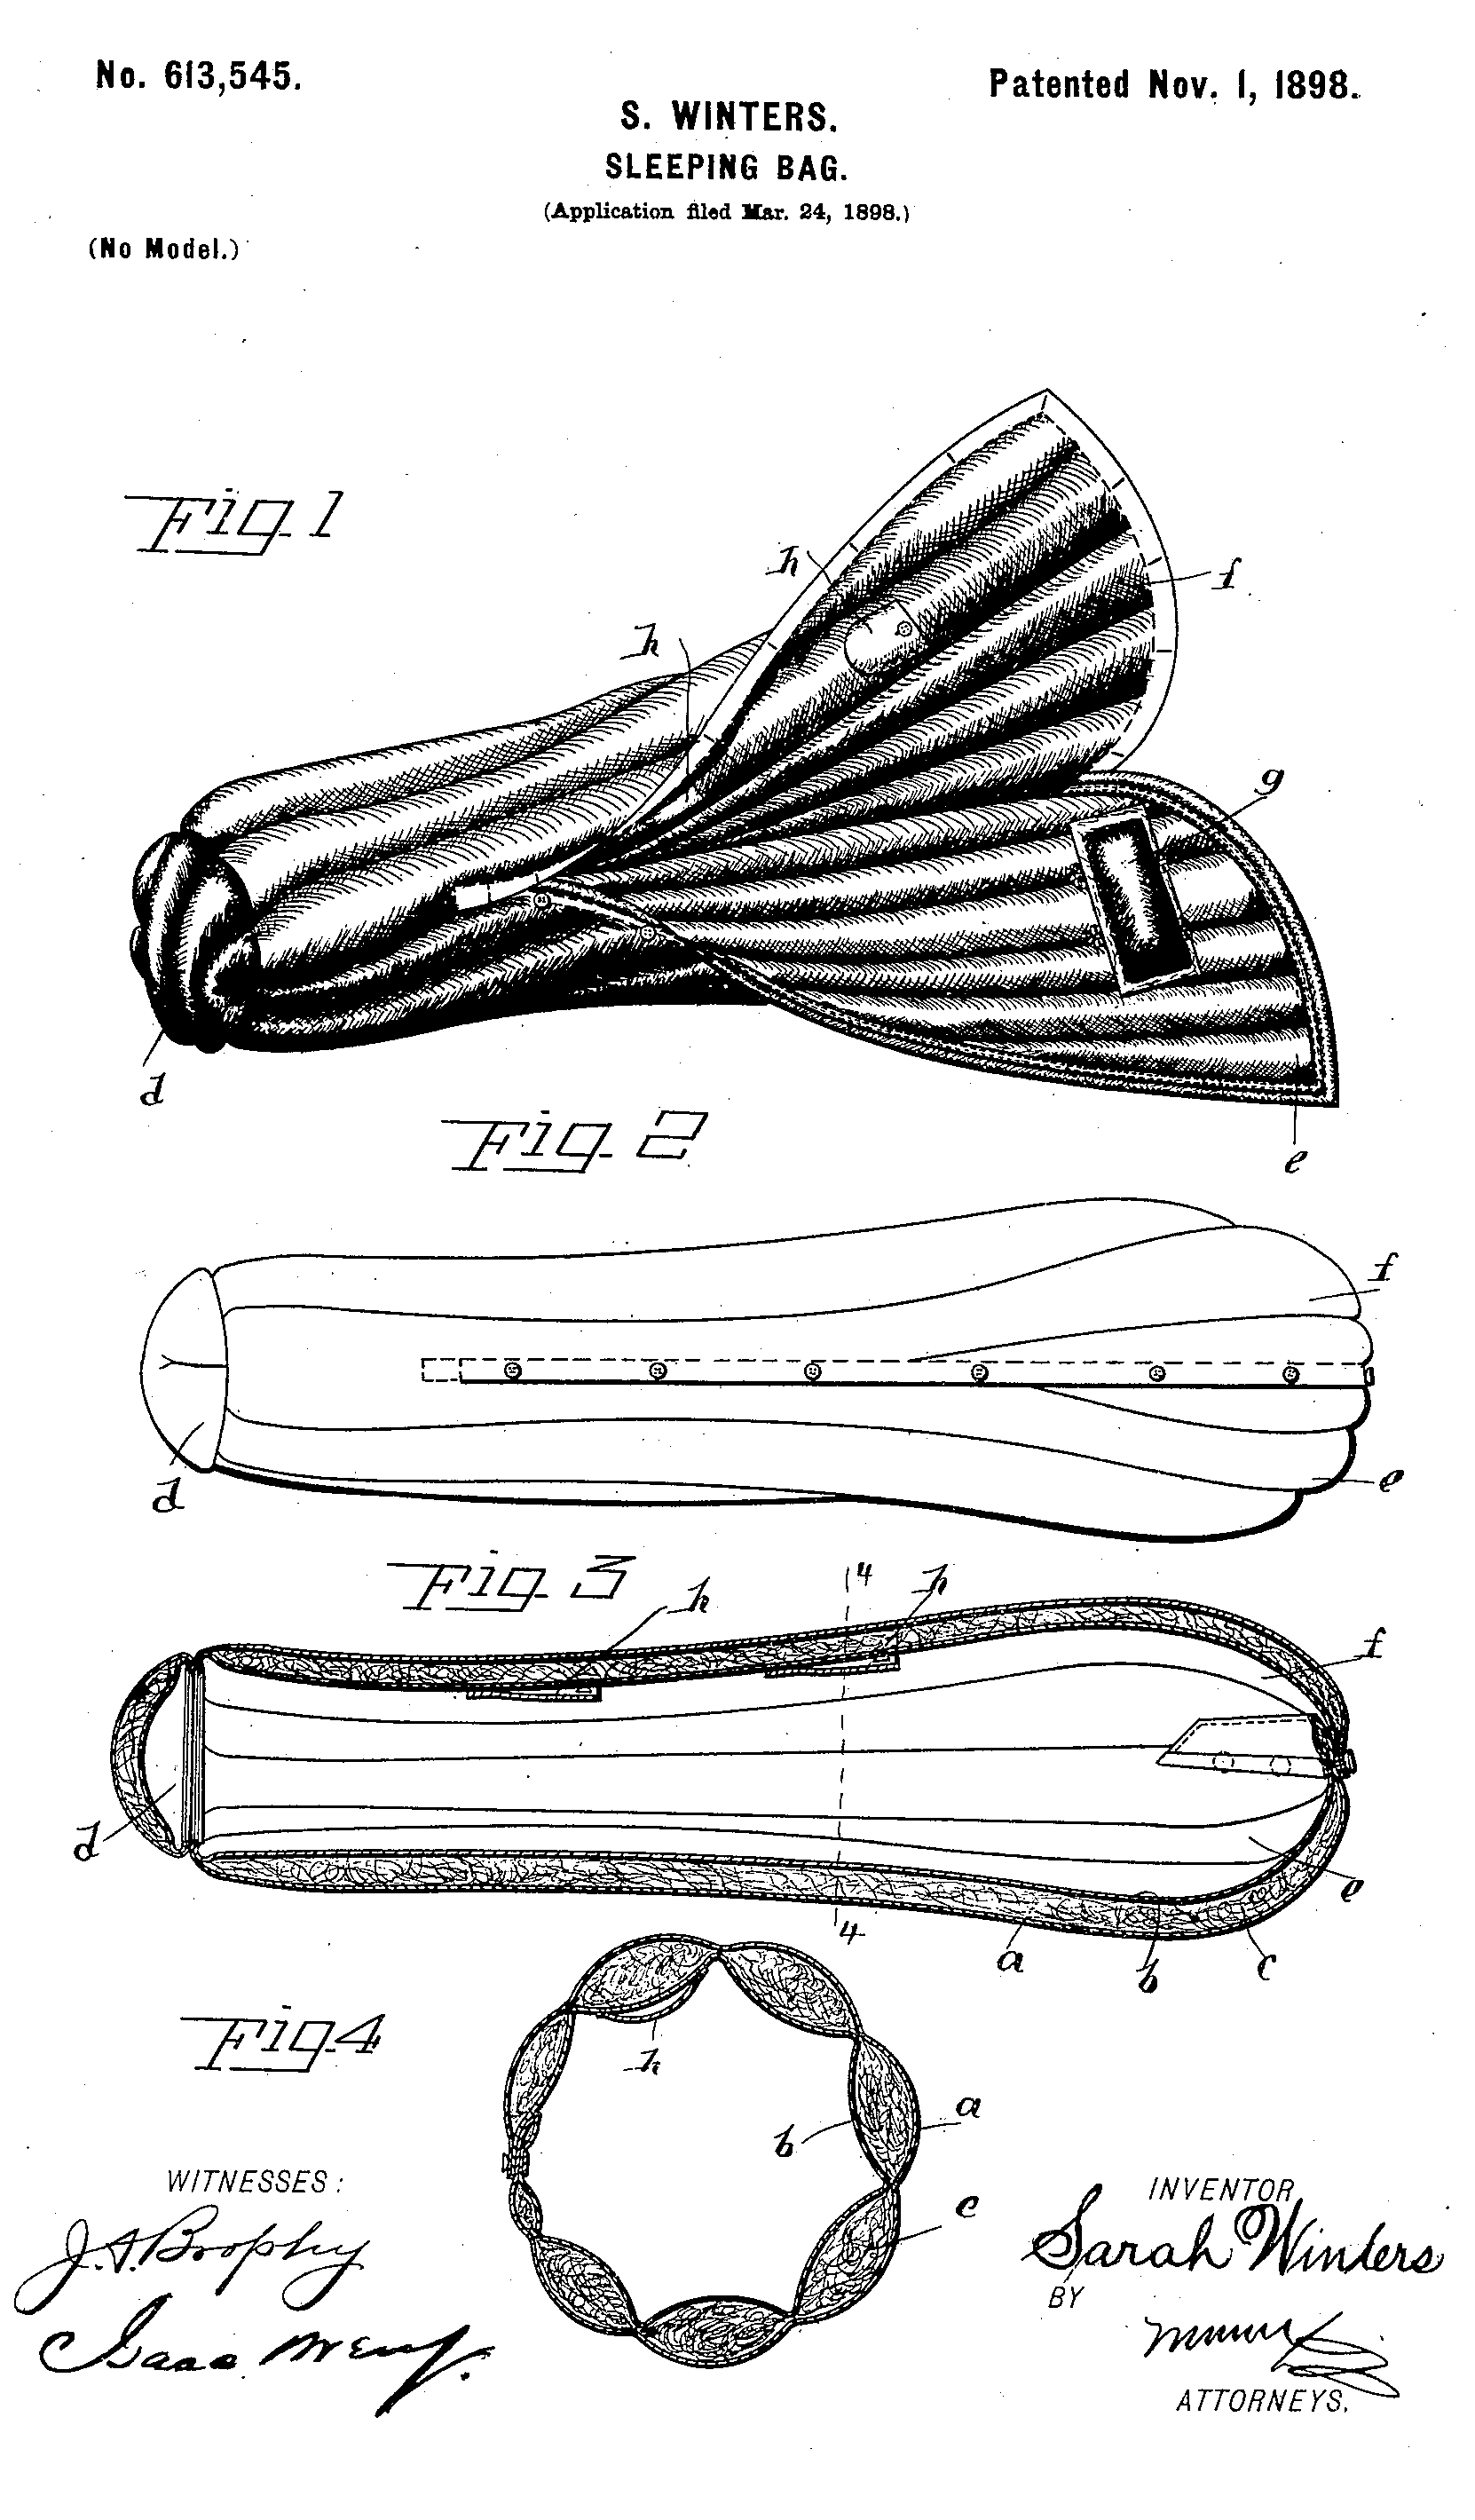 A black and white patent illustration detailing the form and assembly of the S. Winters Sleeping Bag—patented November 1, 1898